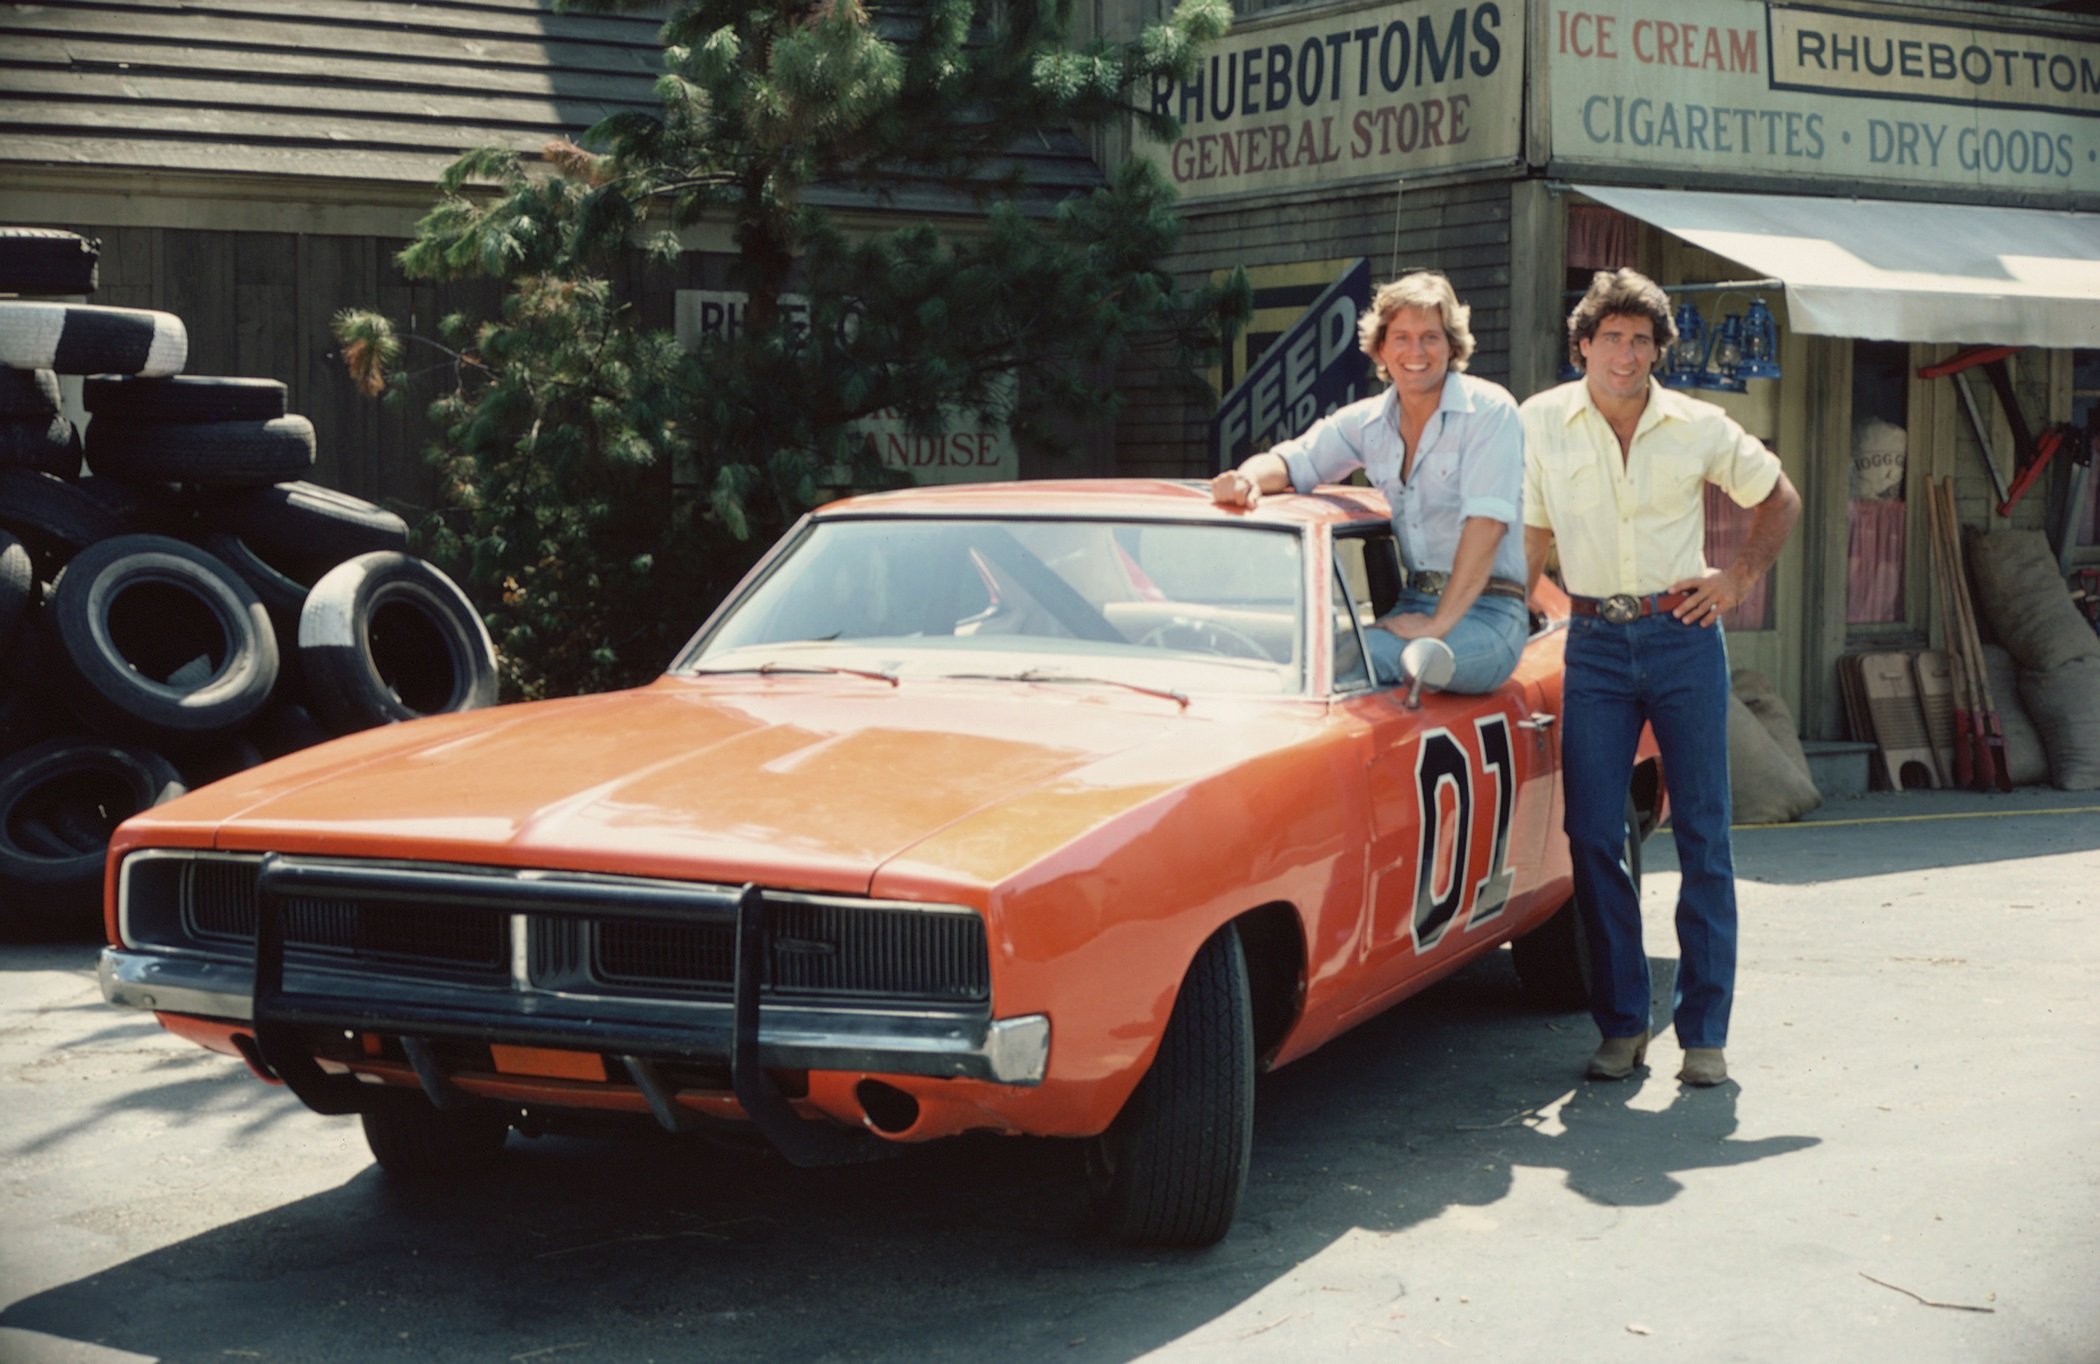 Byron Cherry and Christopher Mayer pose with the iconic The Dukes of Hazzard car